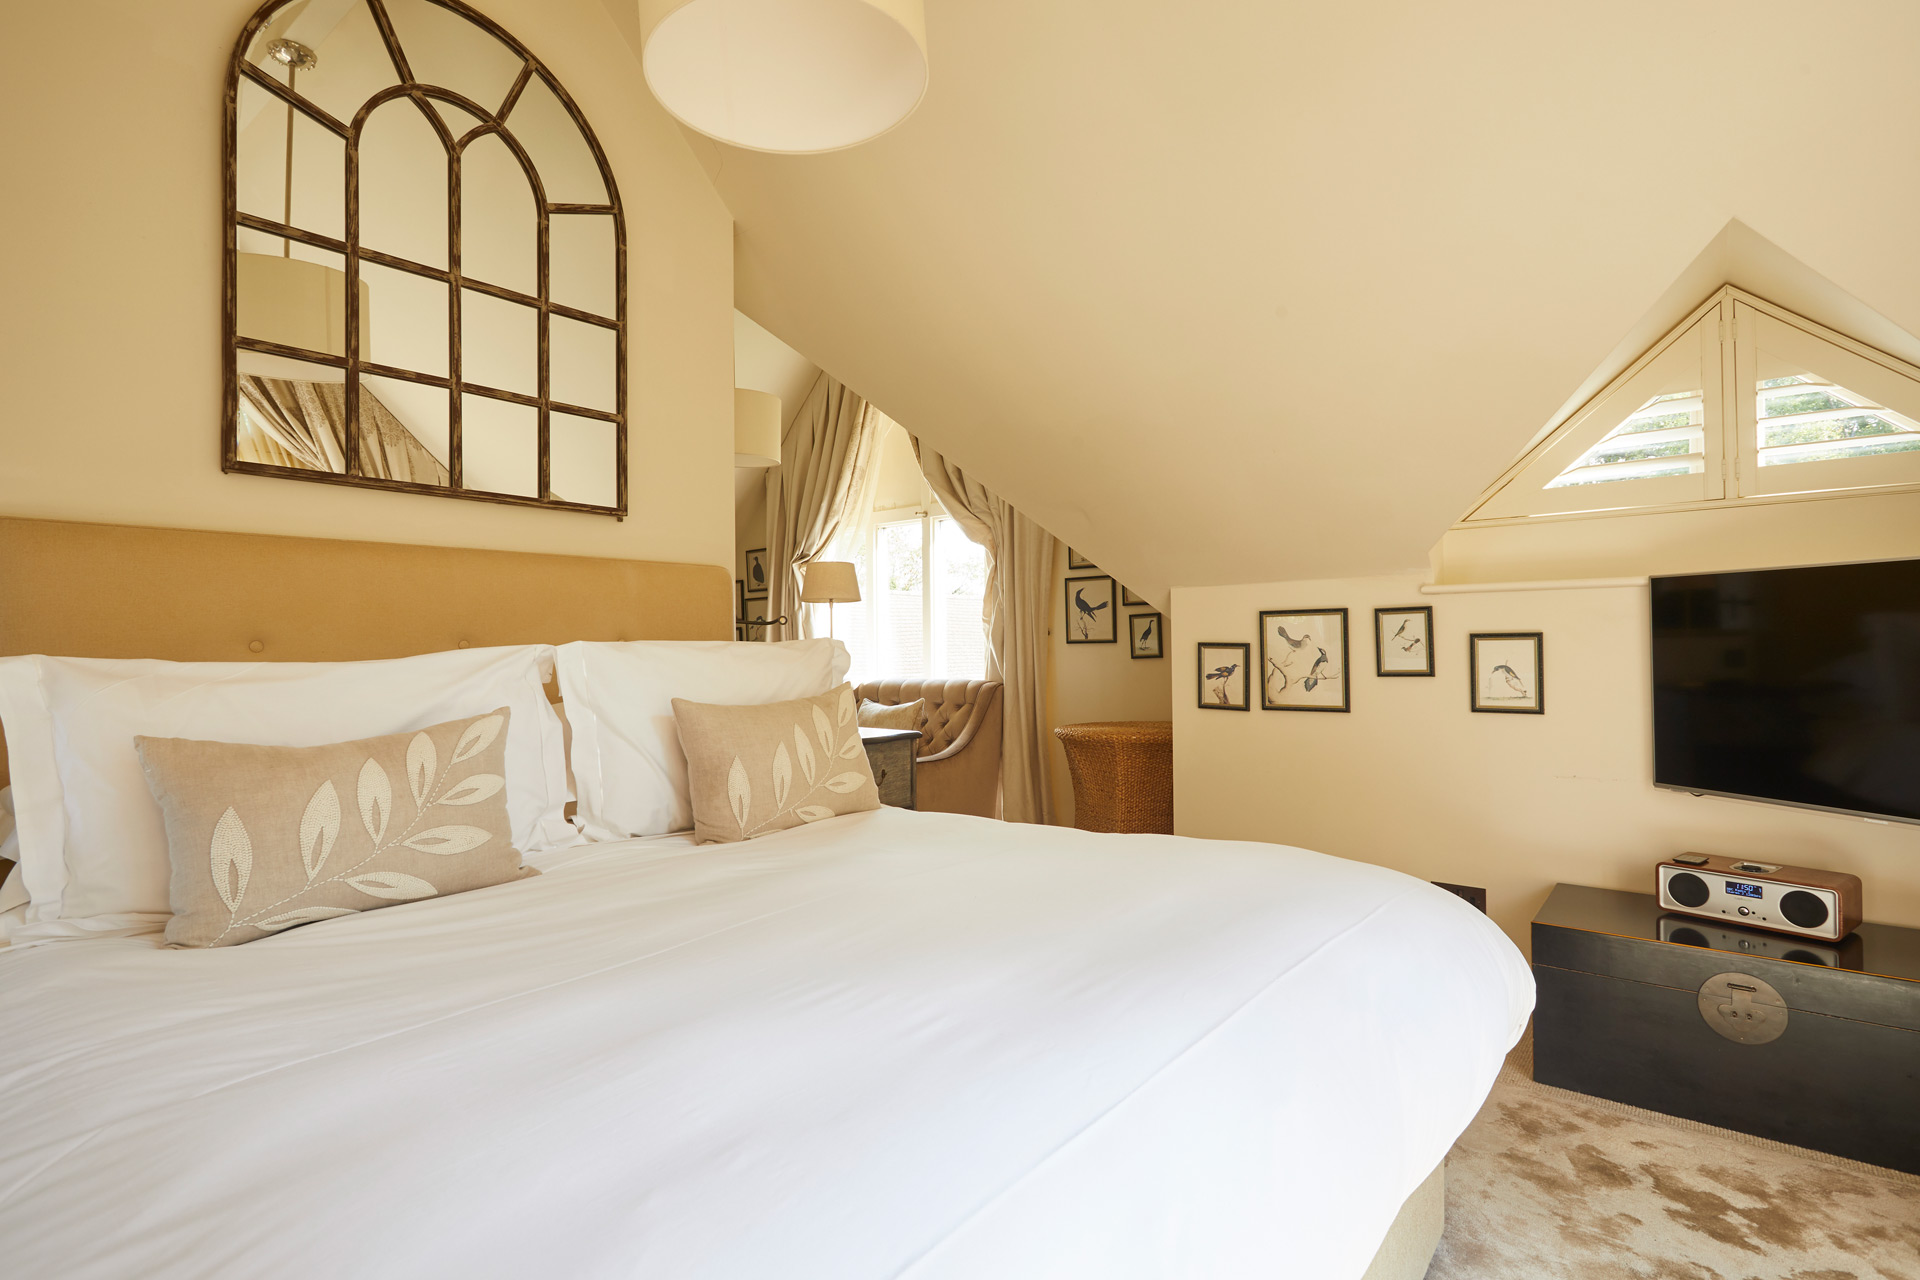 Hotel bedroom with taupe accents and dormer windows.